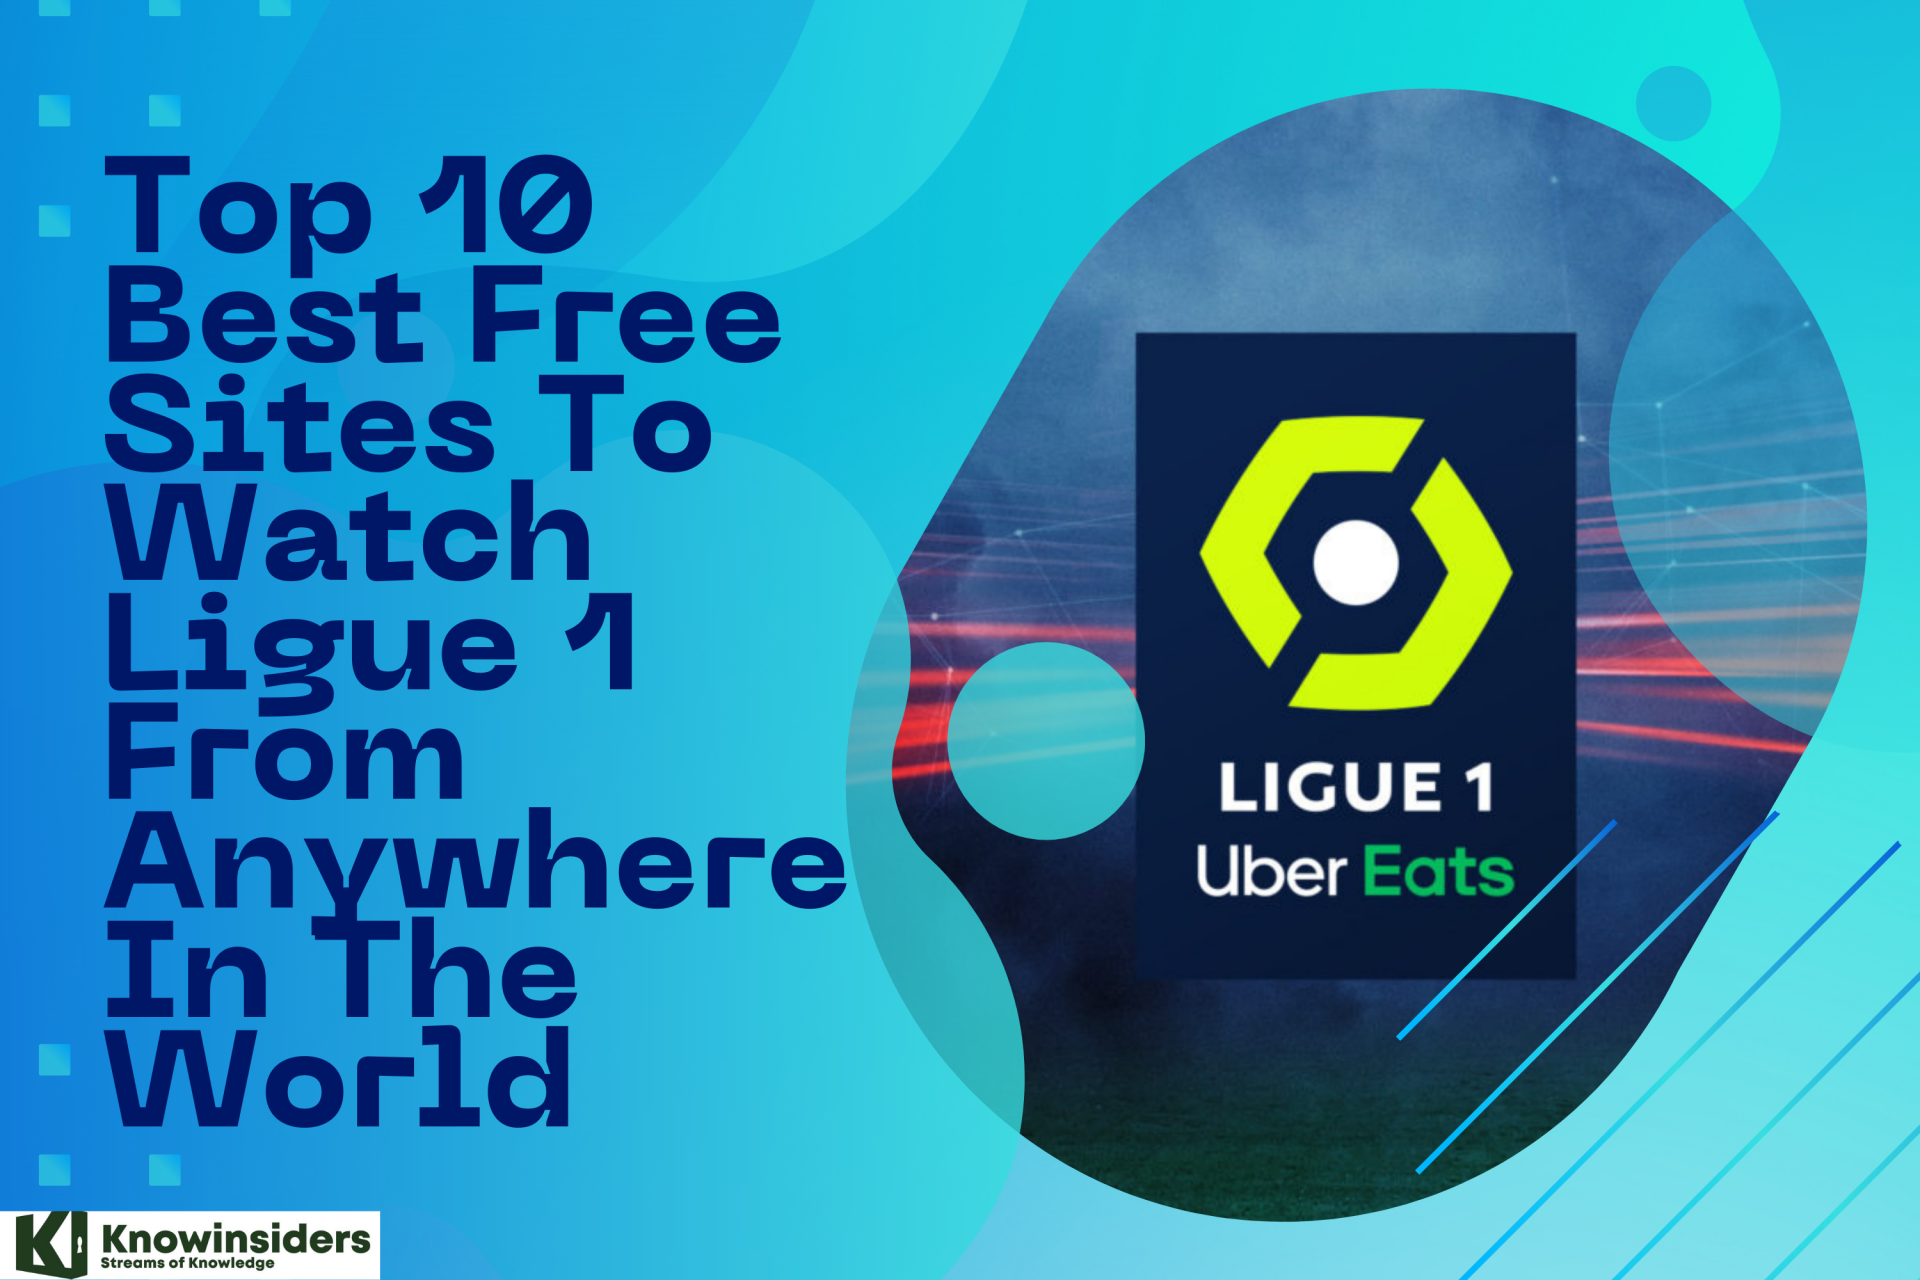 Top 10 Best Free Sites To Watch Ligue 1 From Anywhere In The World